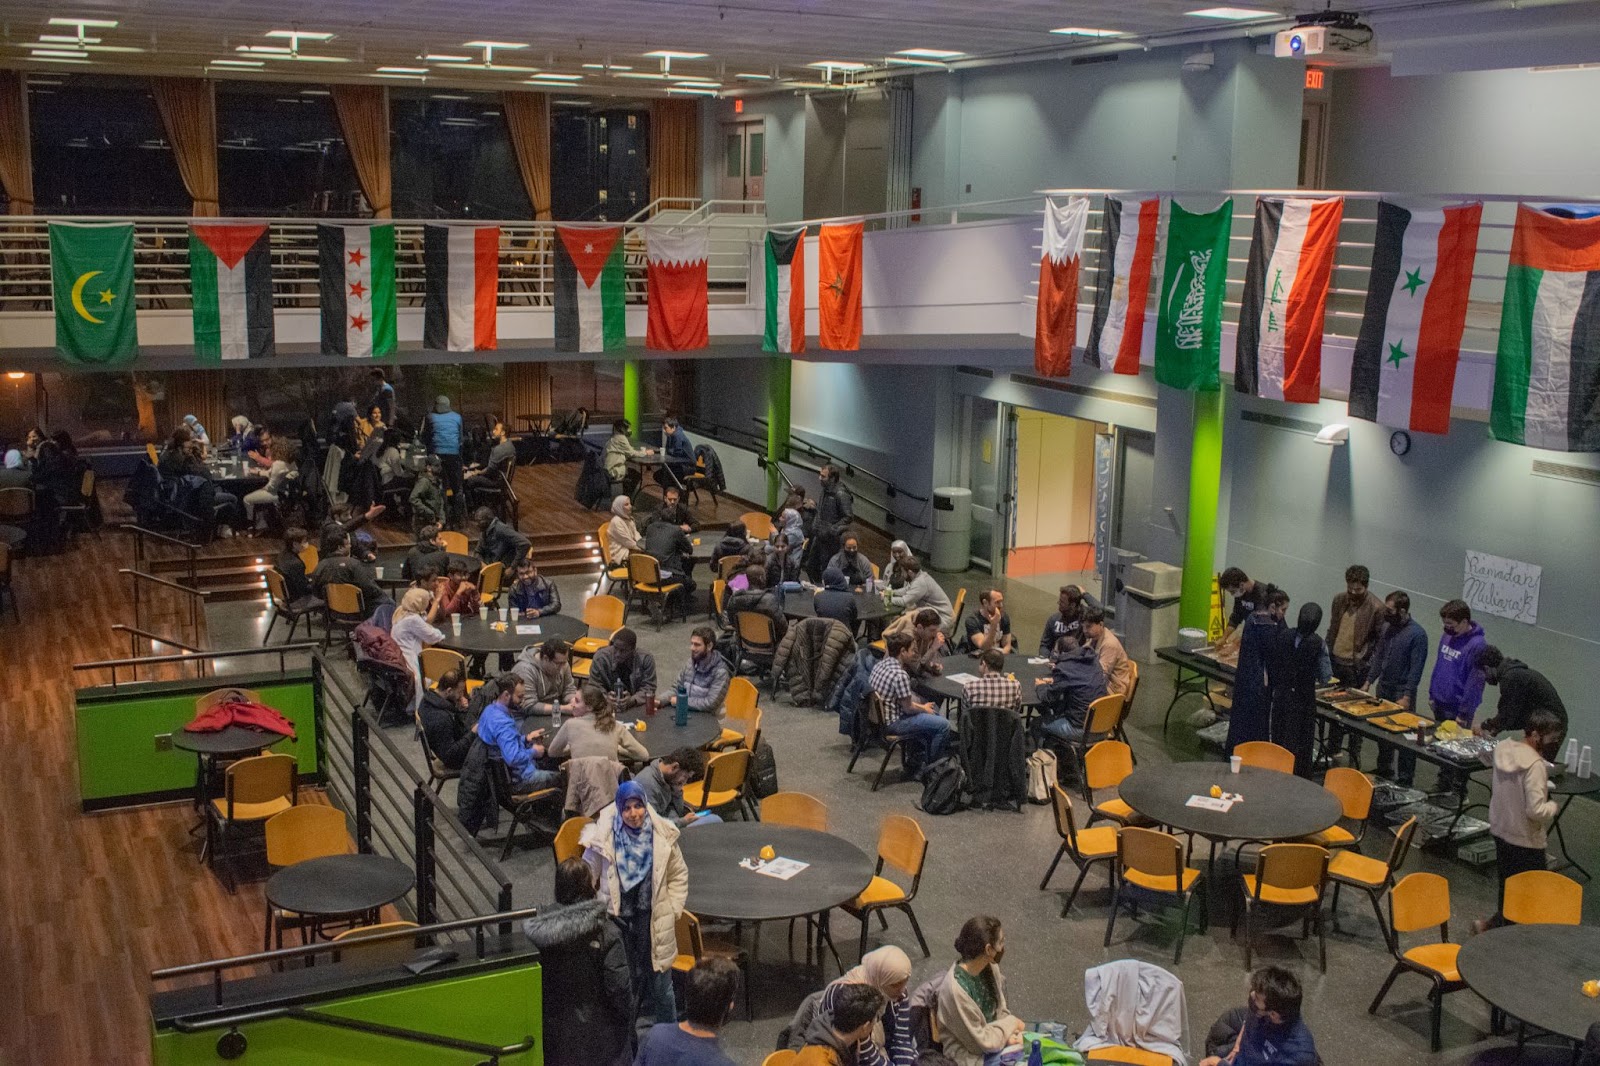 Students eat together in a large cafeteria decorated with flags.